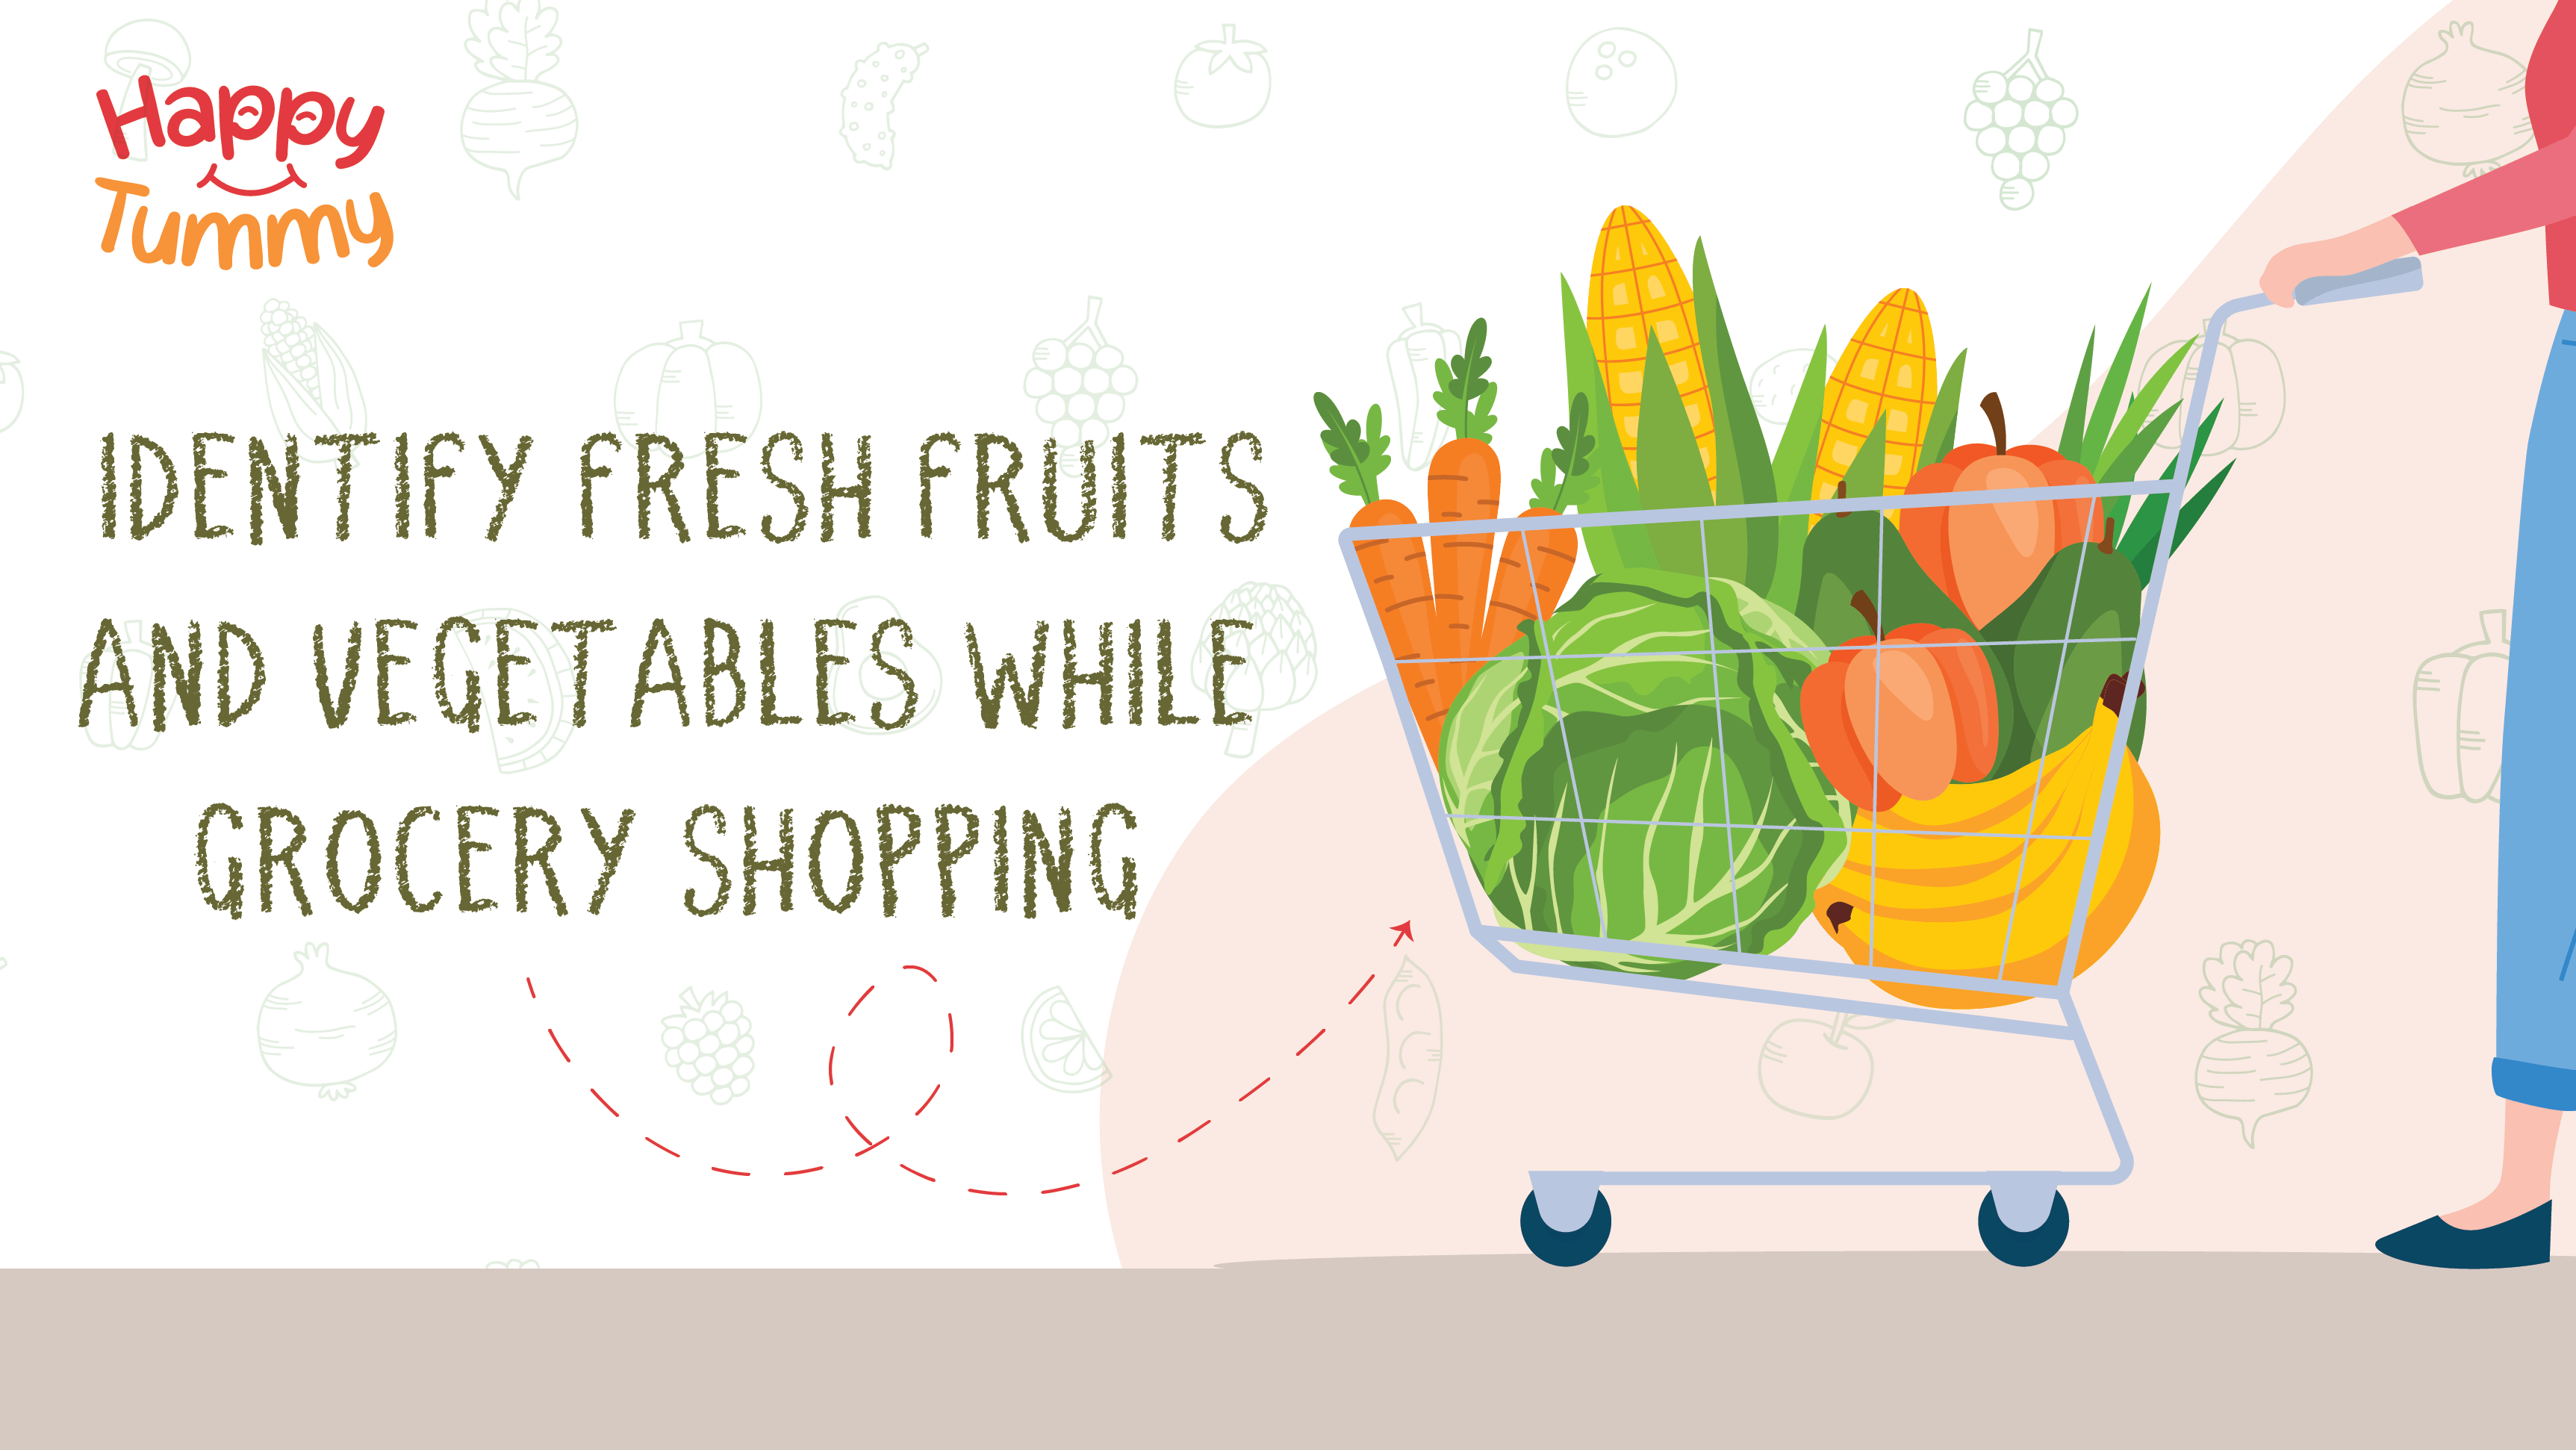 How to identify fresh fruits and vegetables while grocery shopping